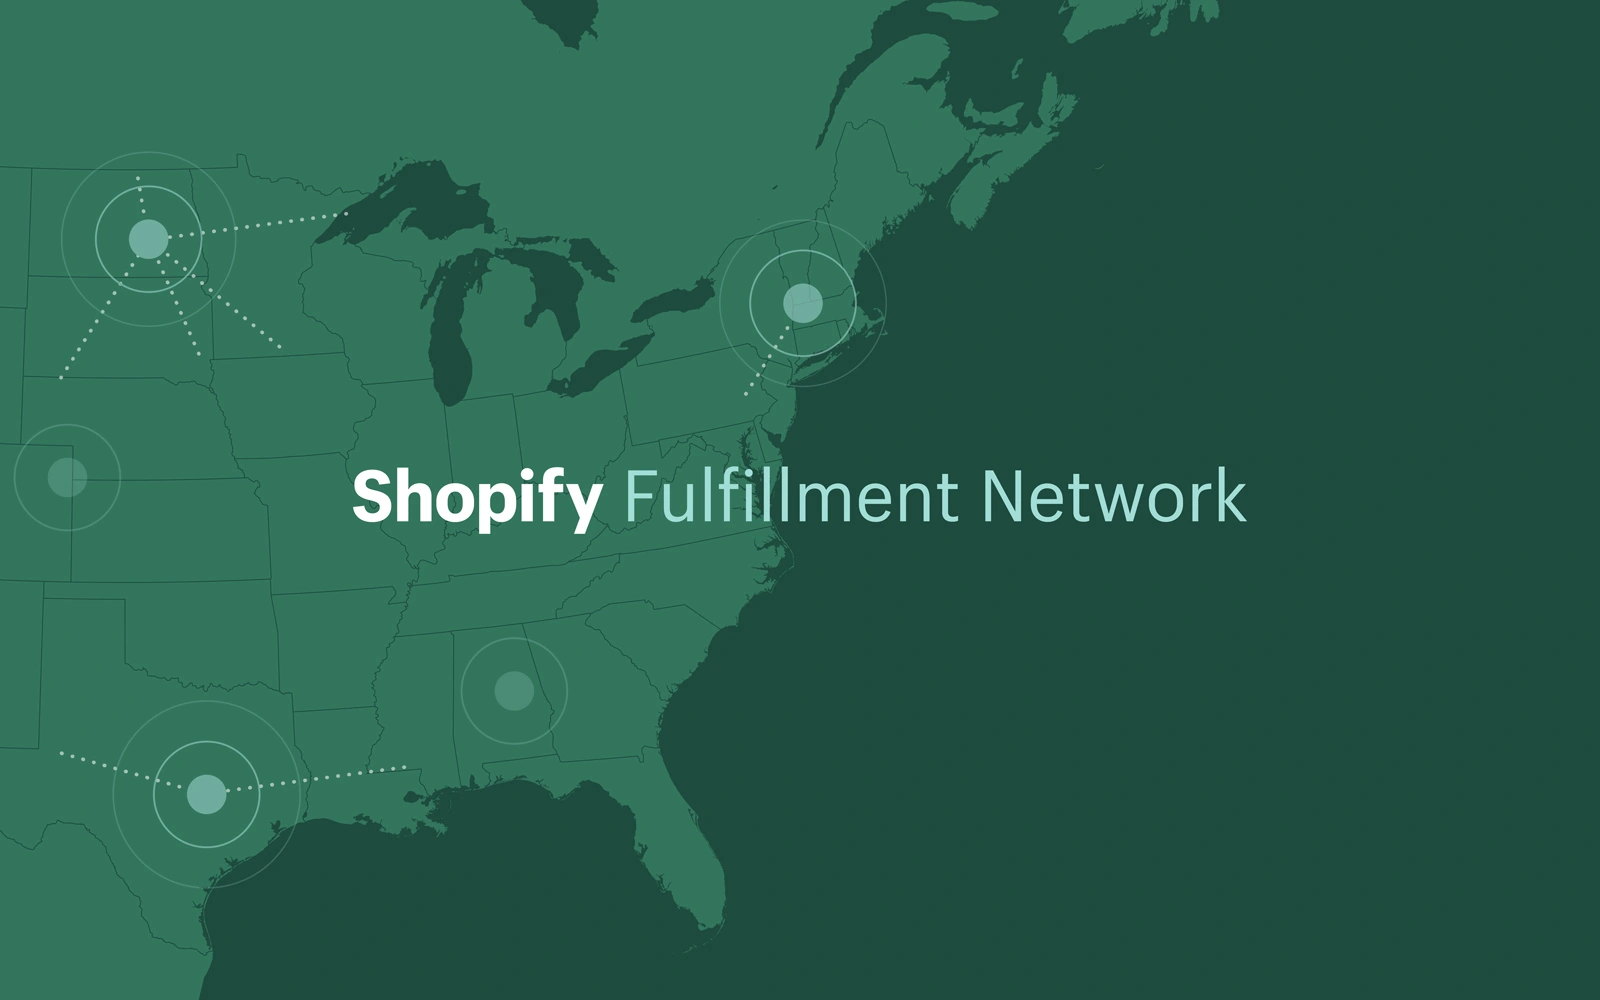 The Shopify Fulfillment Service: What is the Shopify Fulfillment Network?